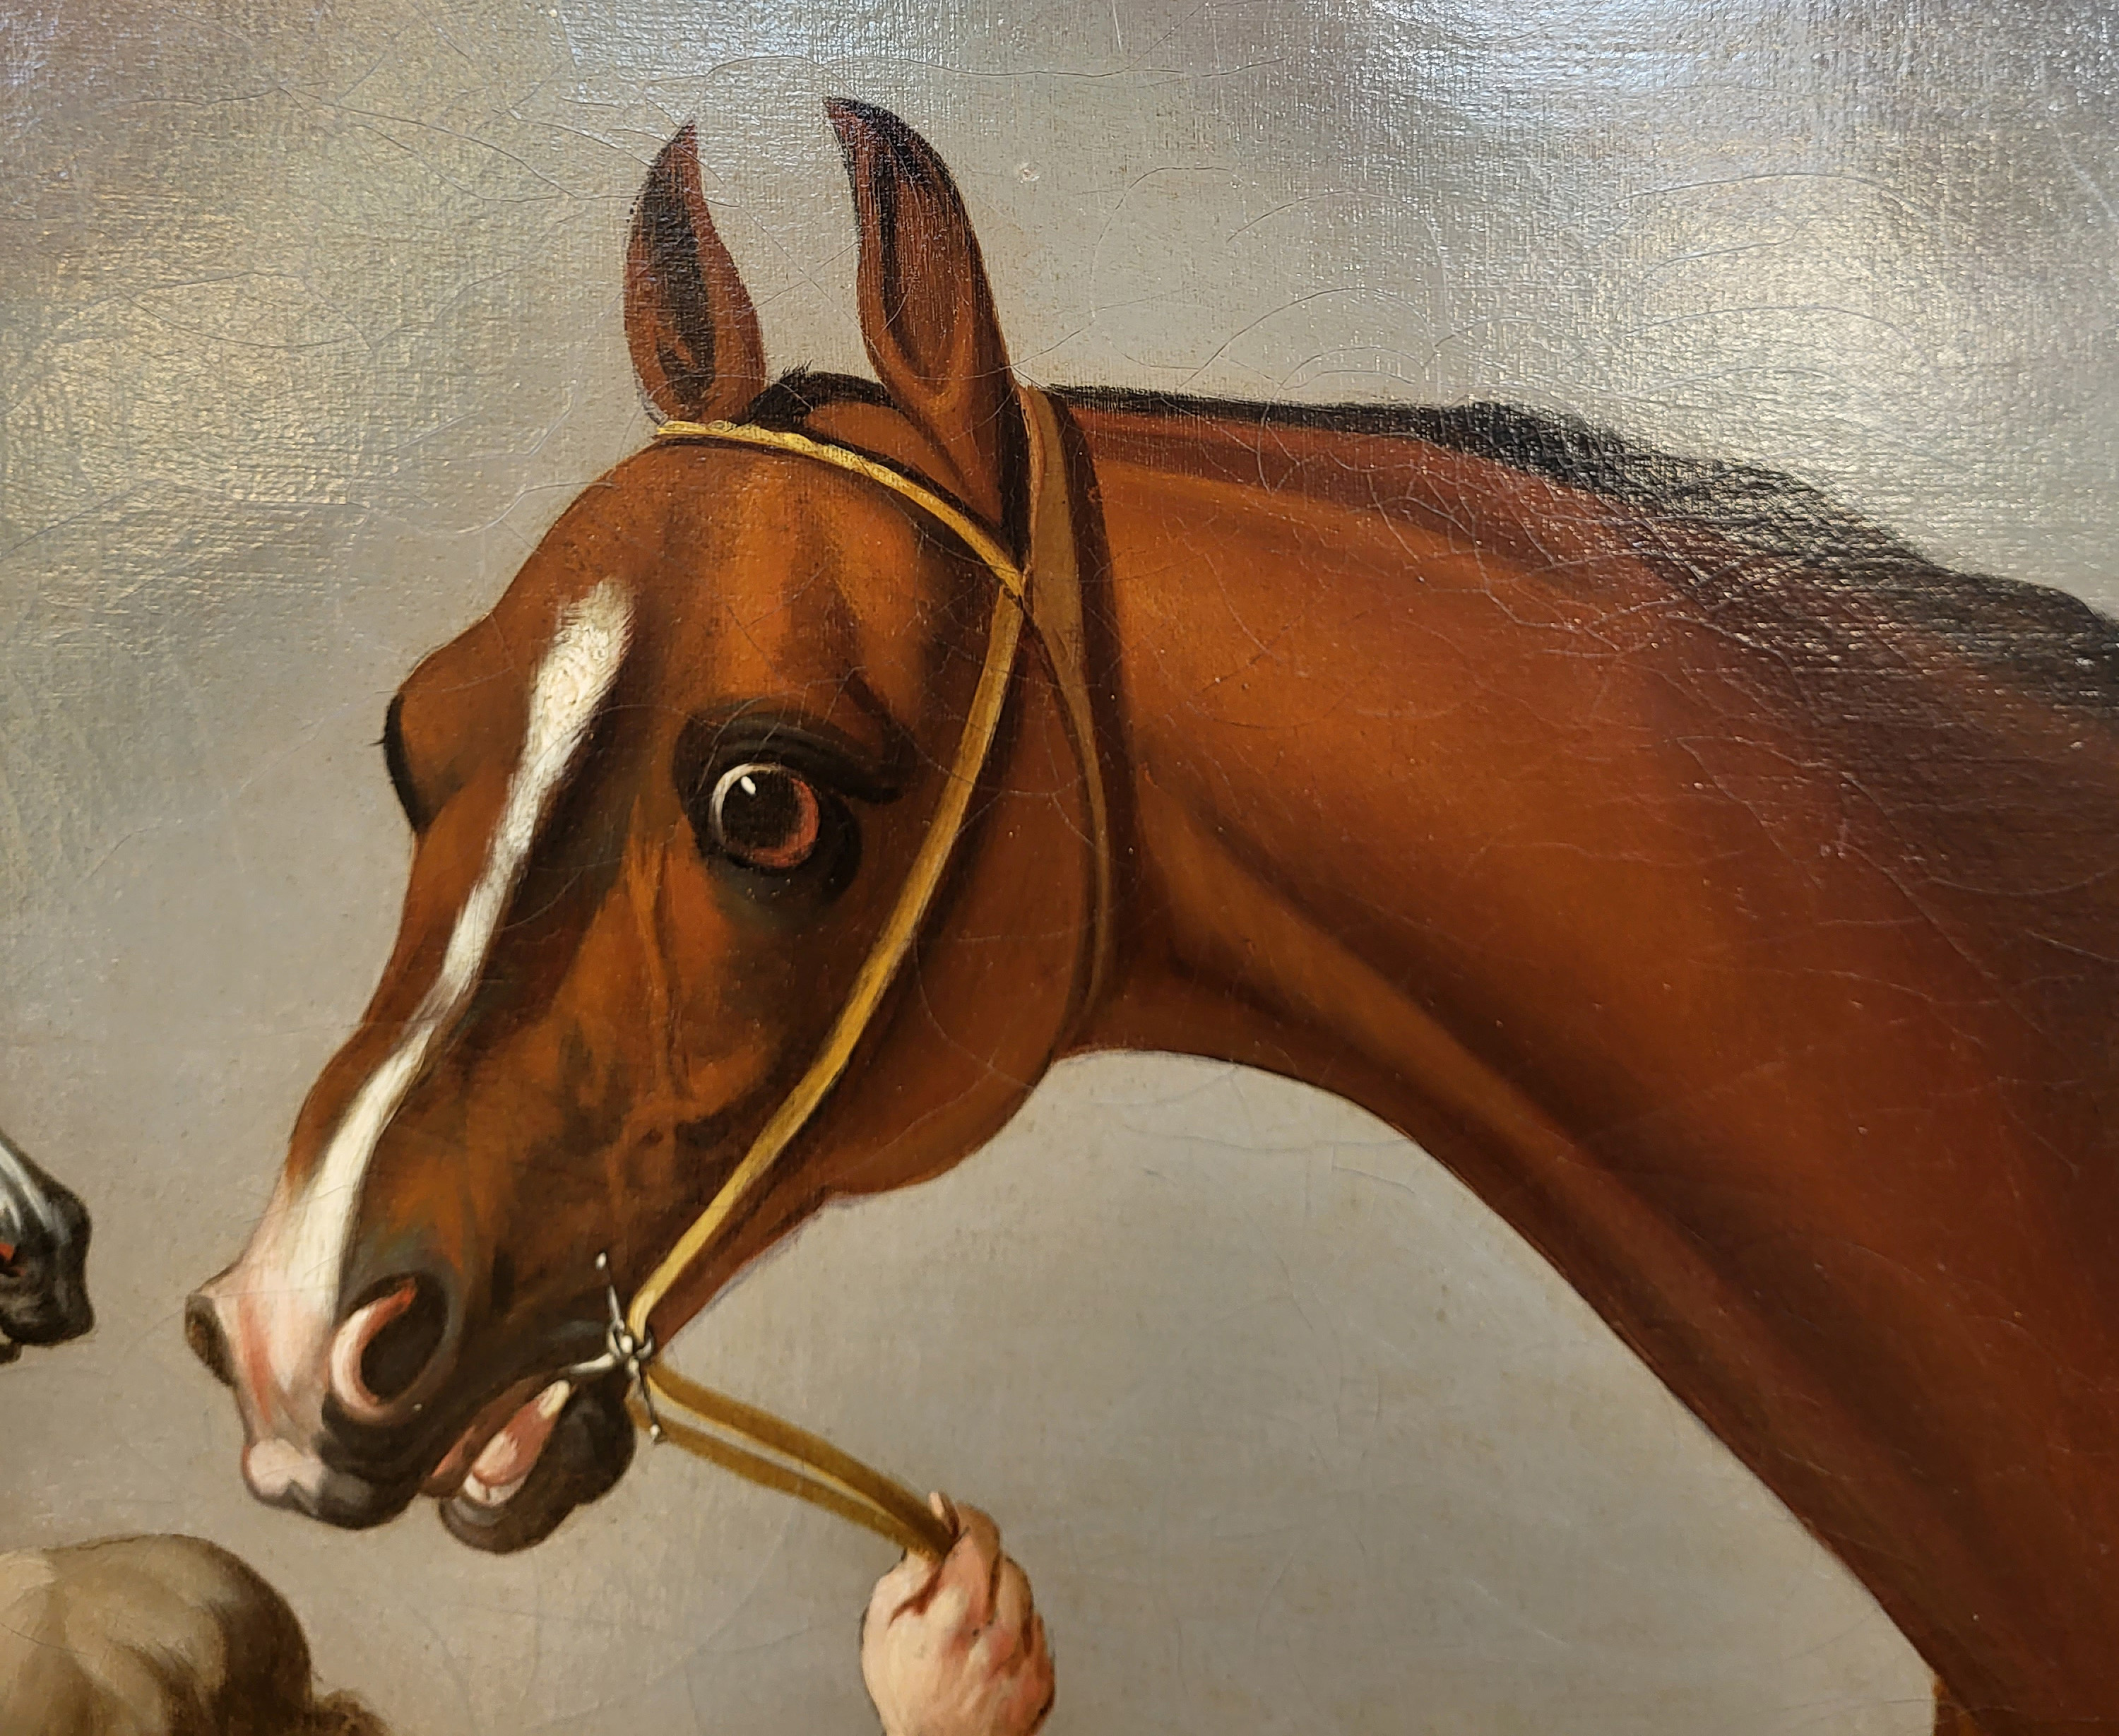 ATTRIBUTED TO THOMAS SPENCER, ACTIVE 1740 - 1756, OIL ON CANVAS Portrait of the undefeated racehorse - Image 9 of 11